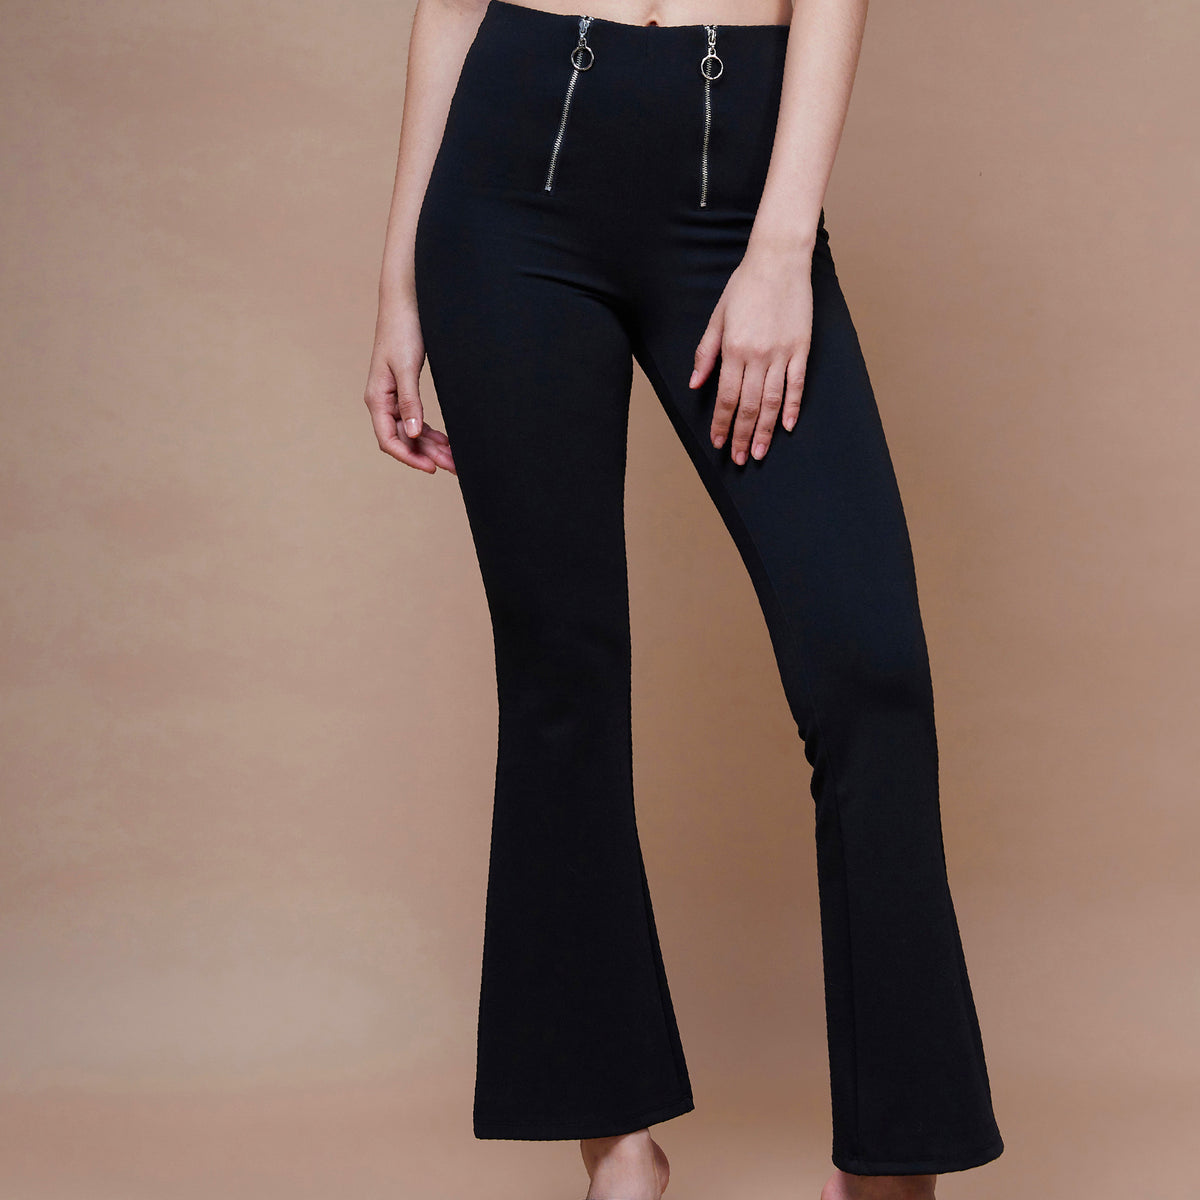 FableStreet Bottoms Pants and Trousers  Buy FableStreet Black High Waist  Side Zipper Turn Up Trousers Online  Nykaa Fashion